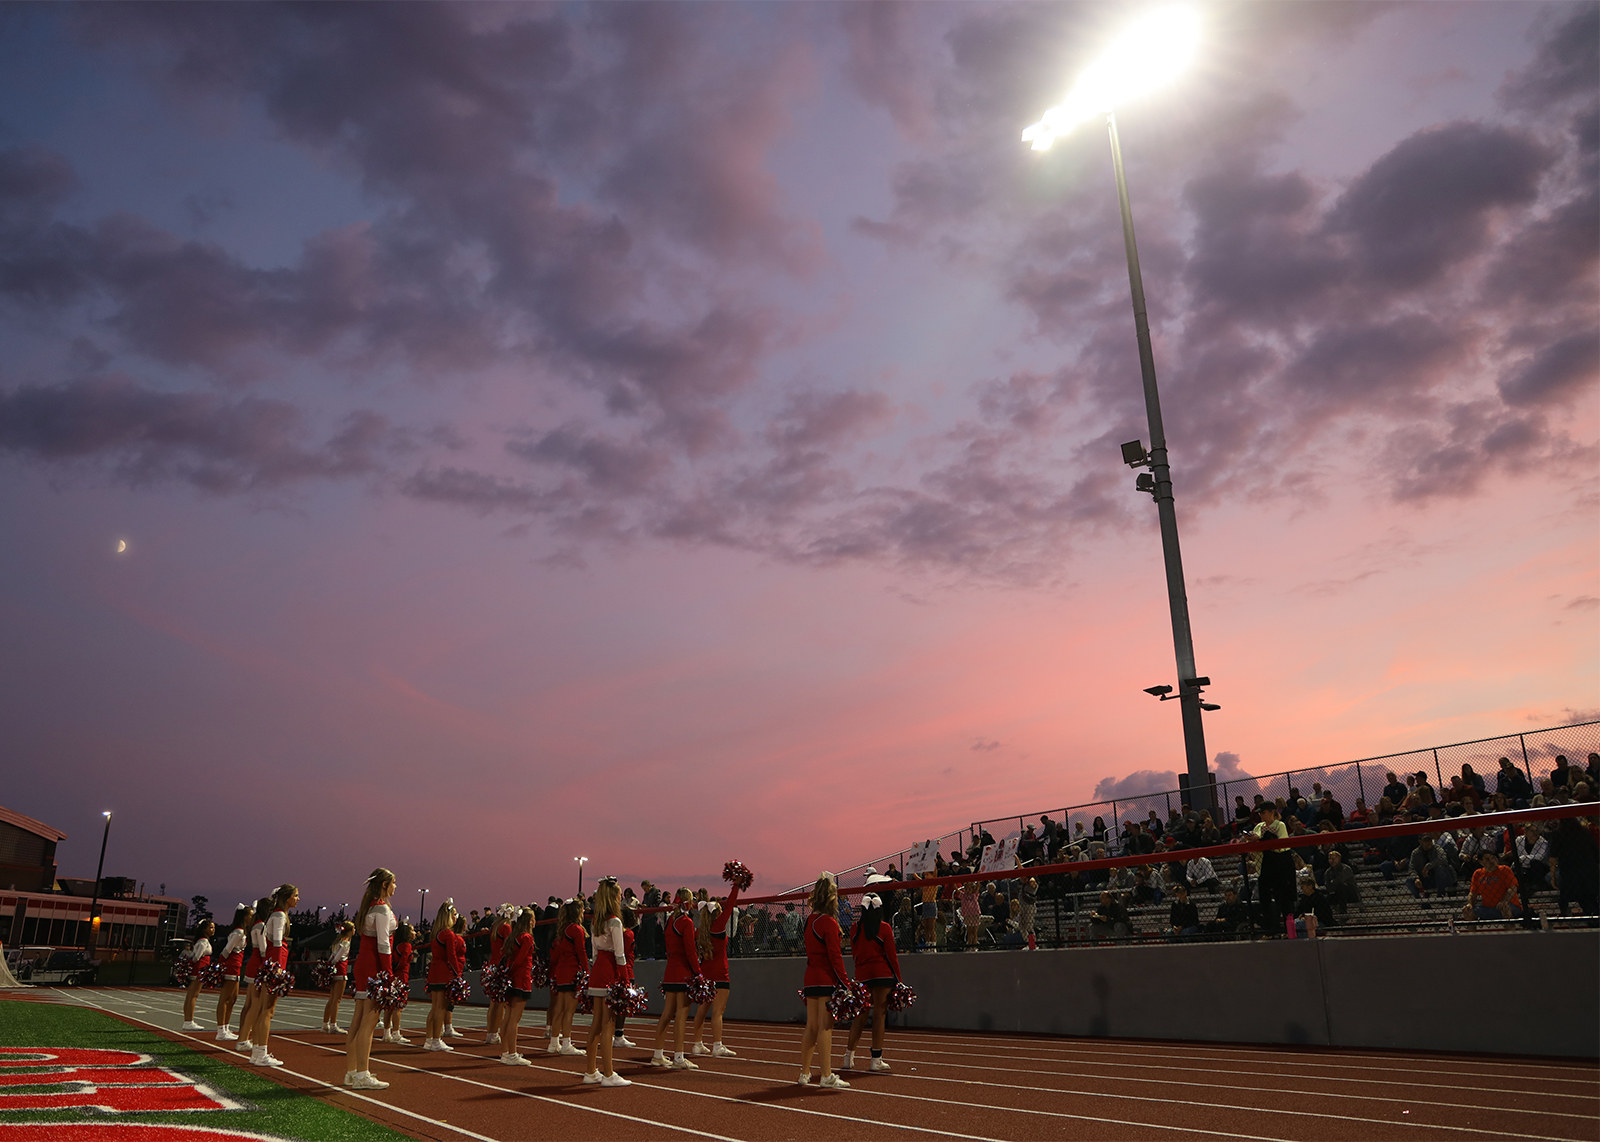 sunset sky behind bleachers at football game with cheerleaders in forground